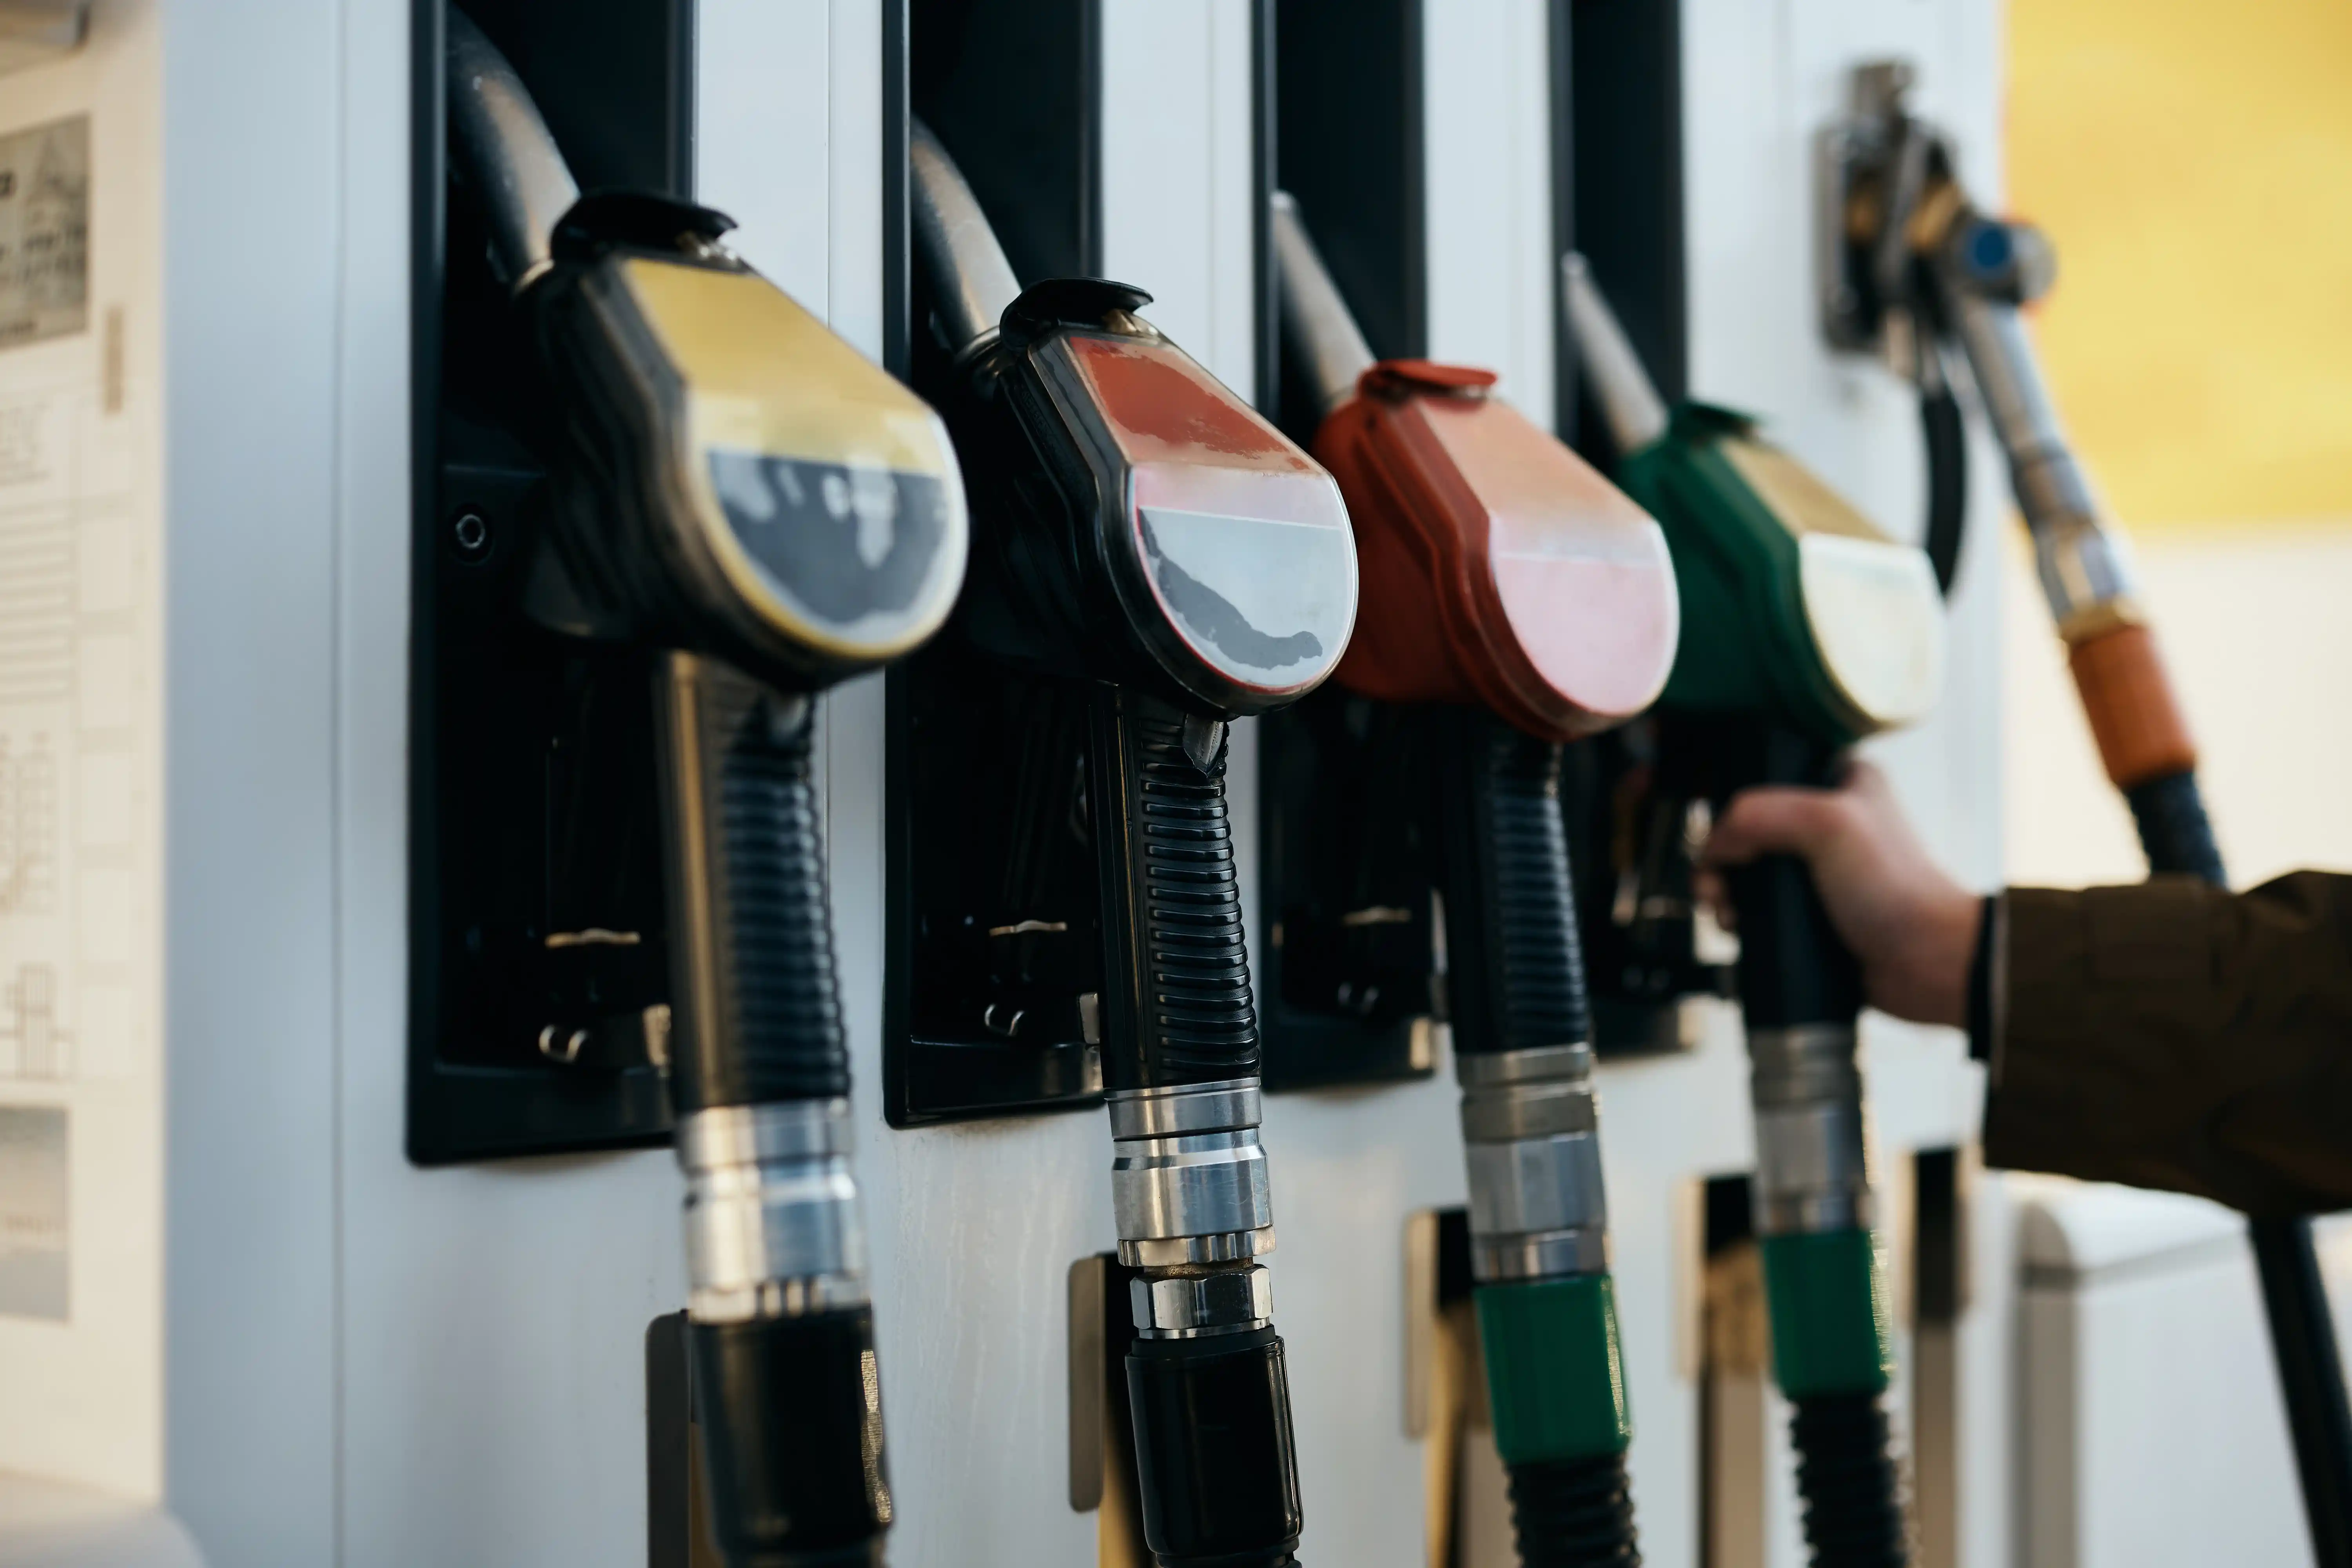 Transforming Gas Station Security with AxxonSoft’s AI-Powered VSaaS Solution